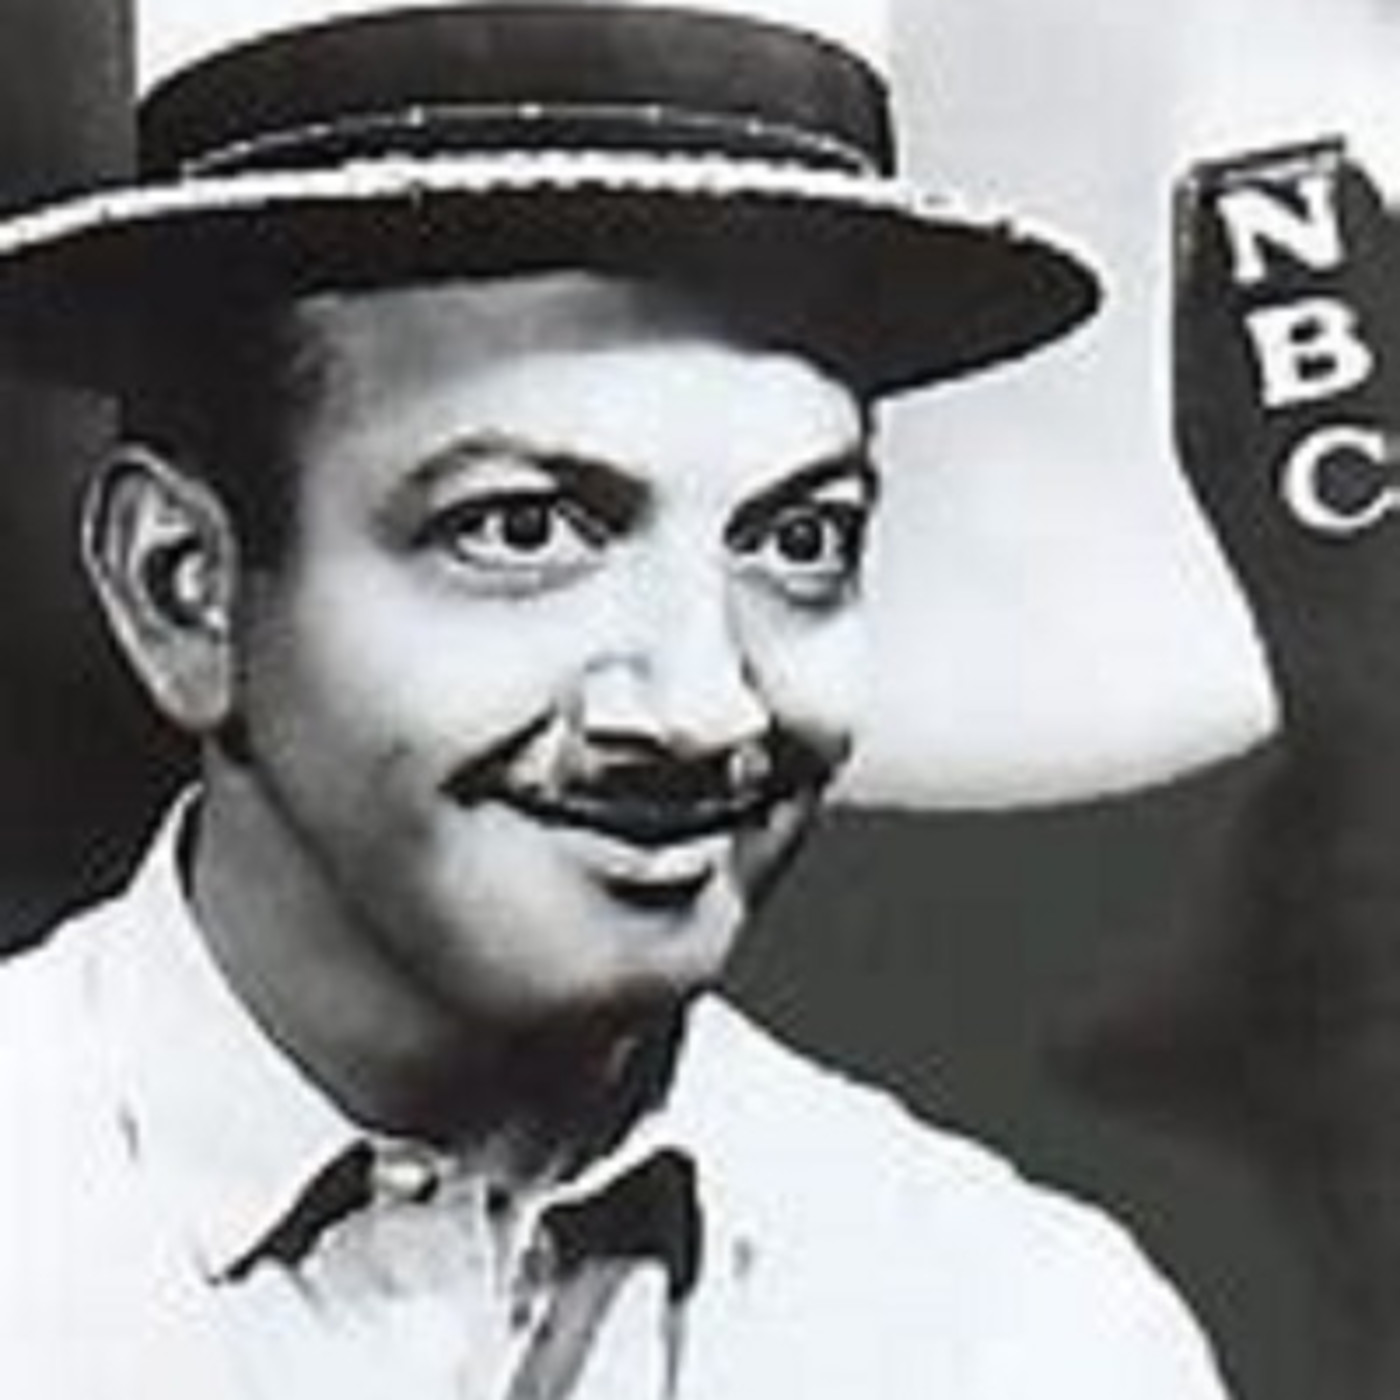 The Mel Blanc Show - Show at the Market - 061747, episode 42